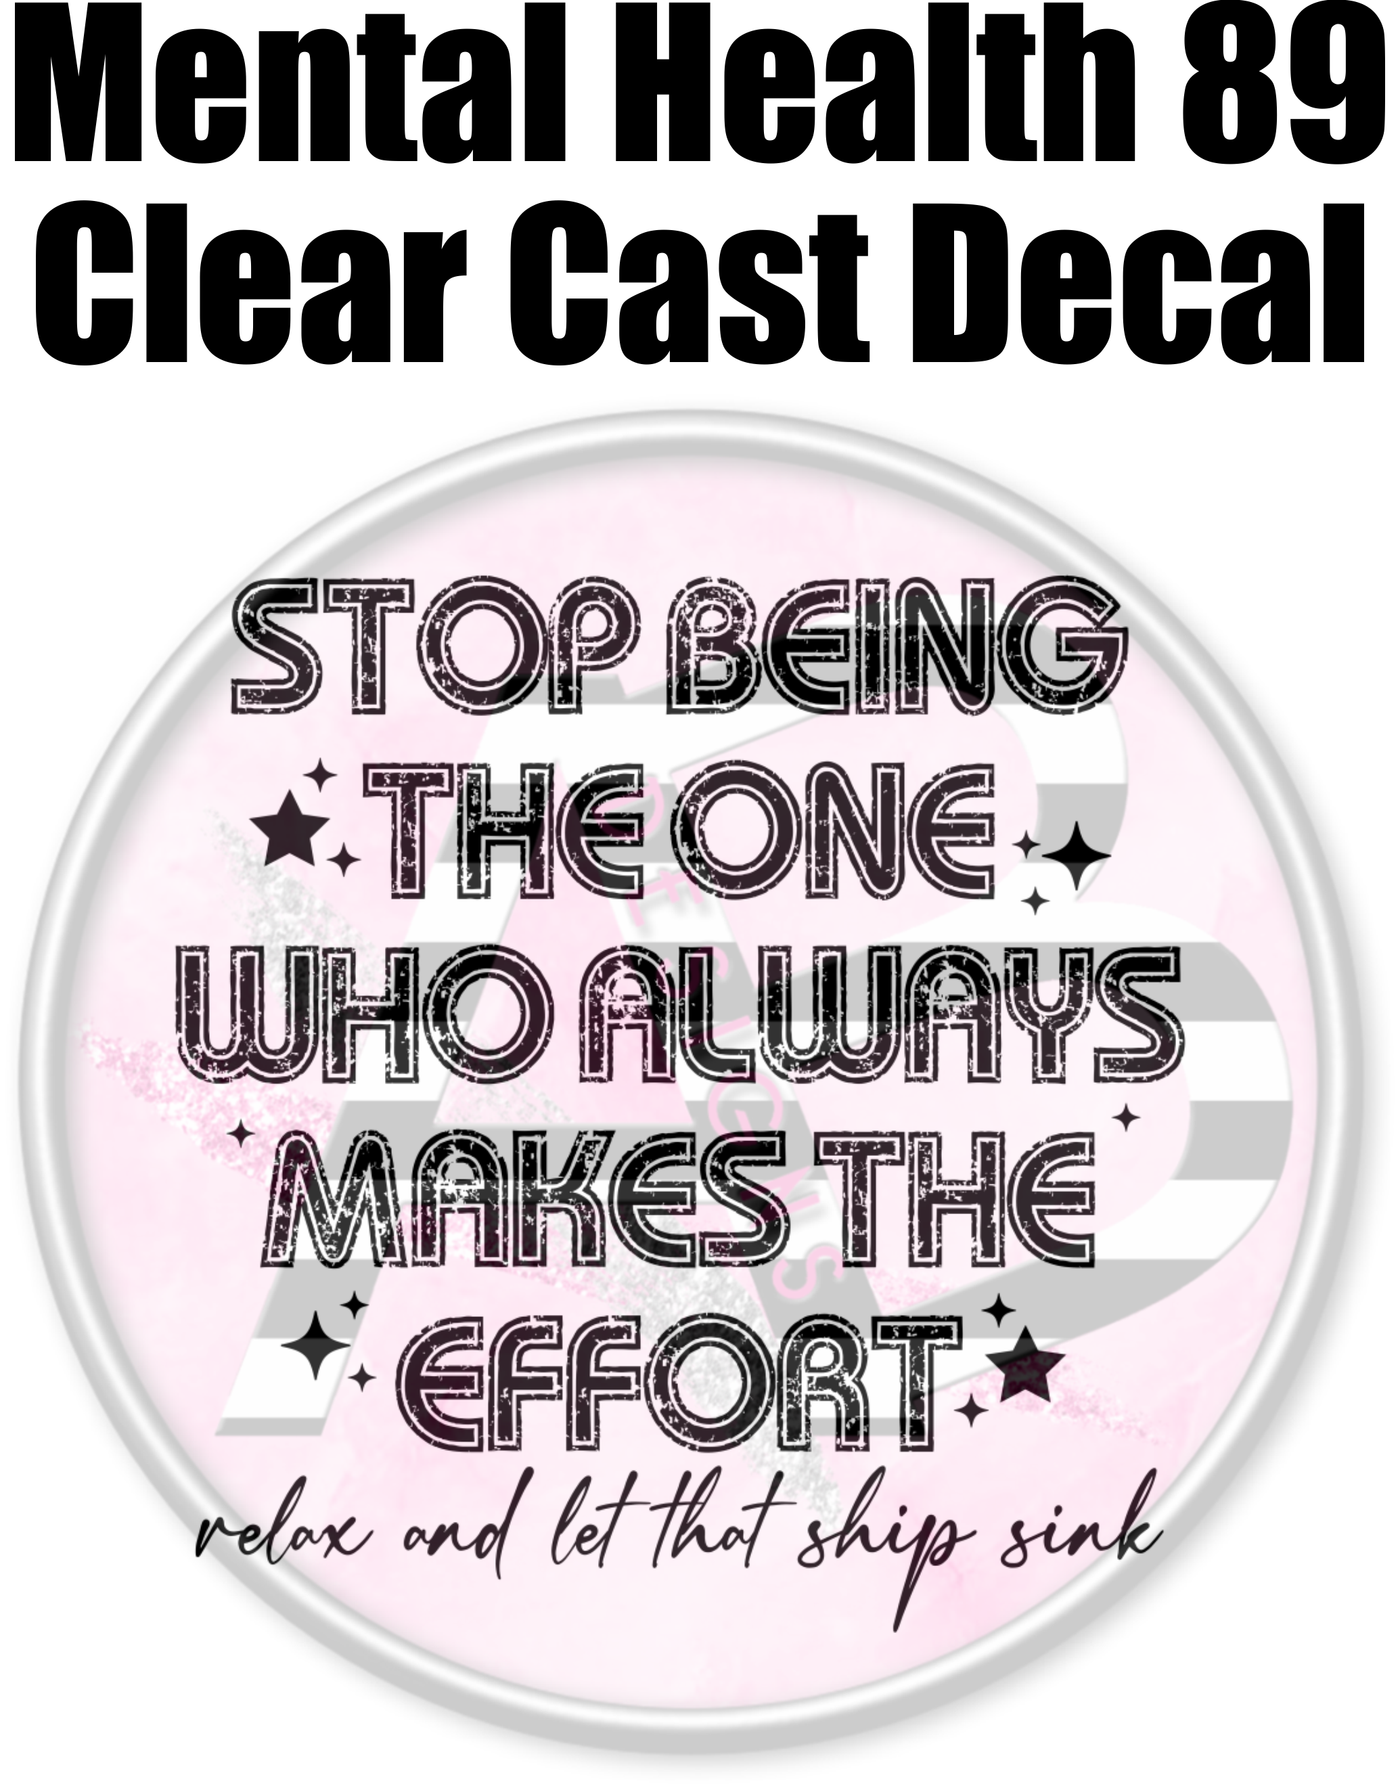 Mental Health 89 - Clear Cast Decal-473